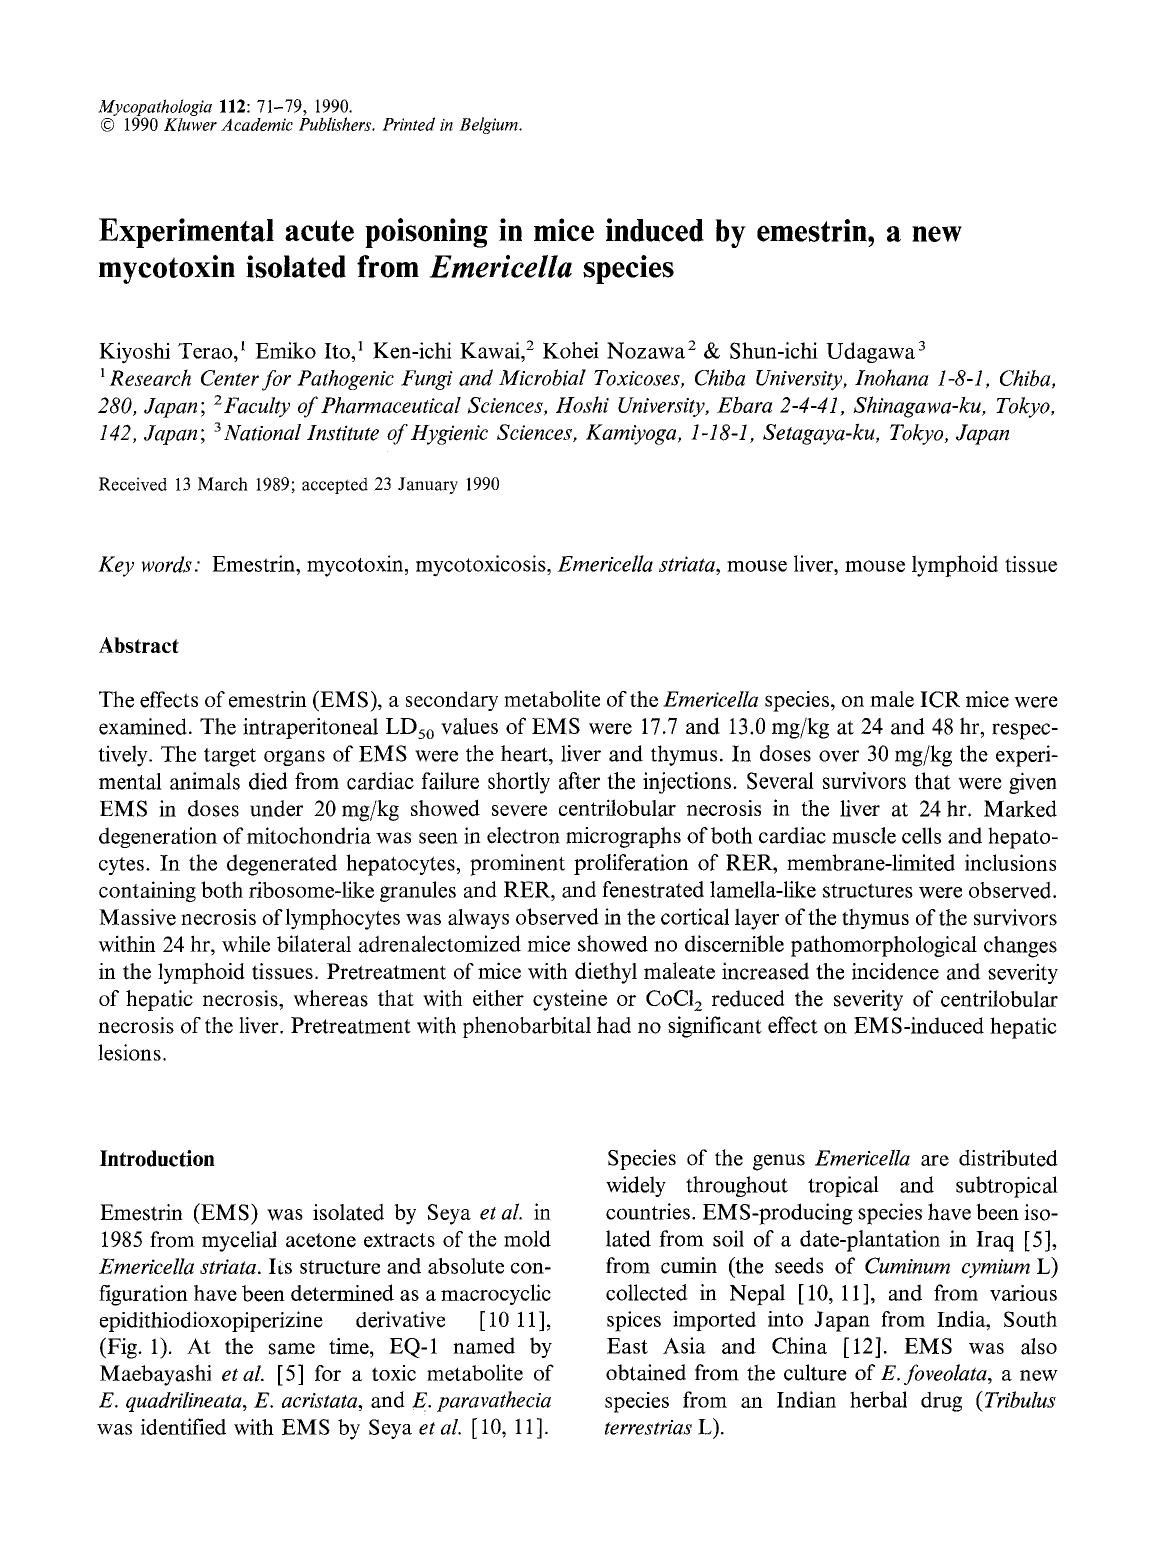 Experimental acute poisoning in mice induced by emestrin, a new mycotoxin isolated from <Emphasis Type="Italic">Emericella<Emphasis> species by Unknown